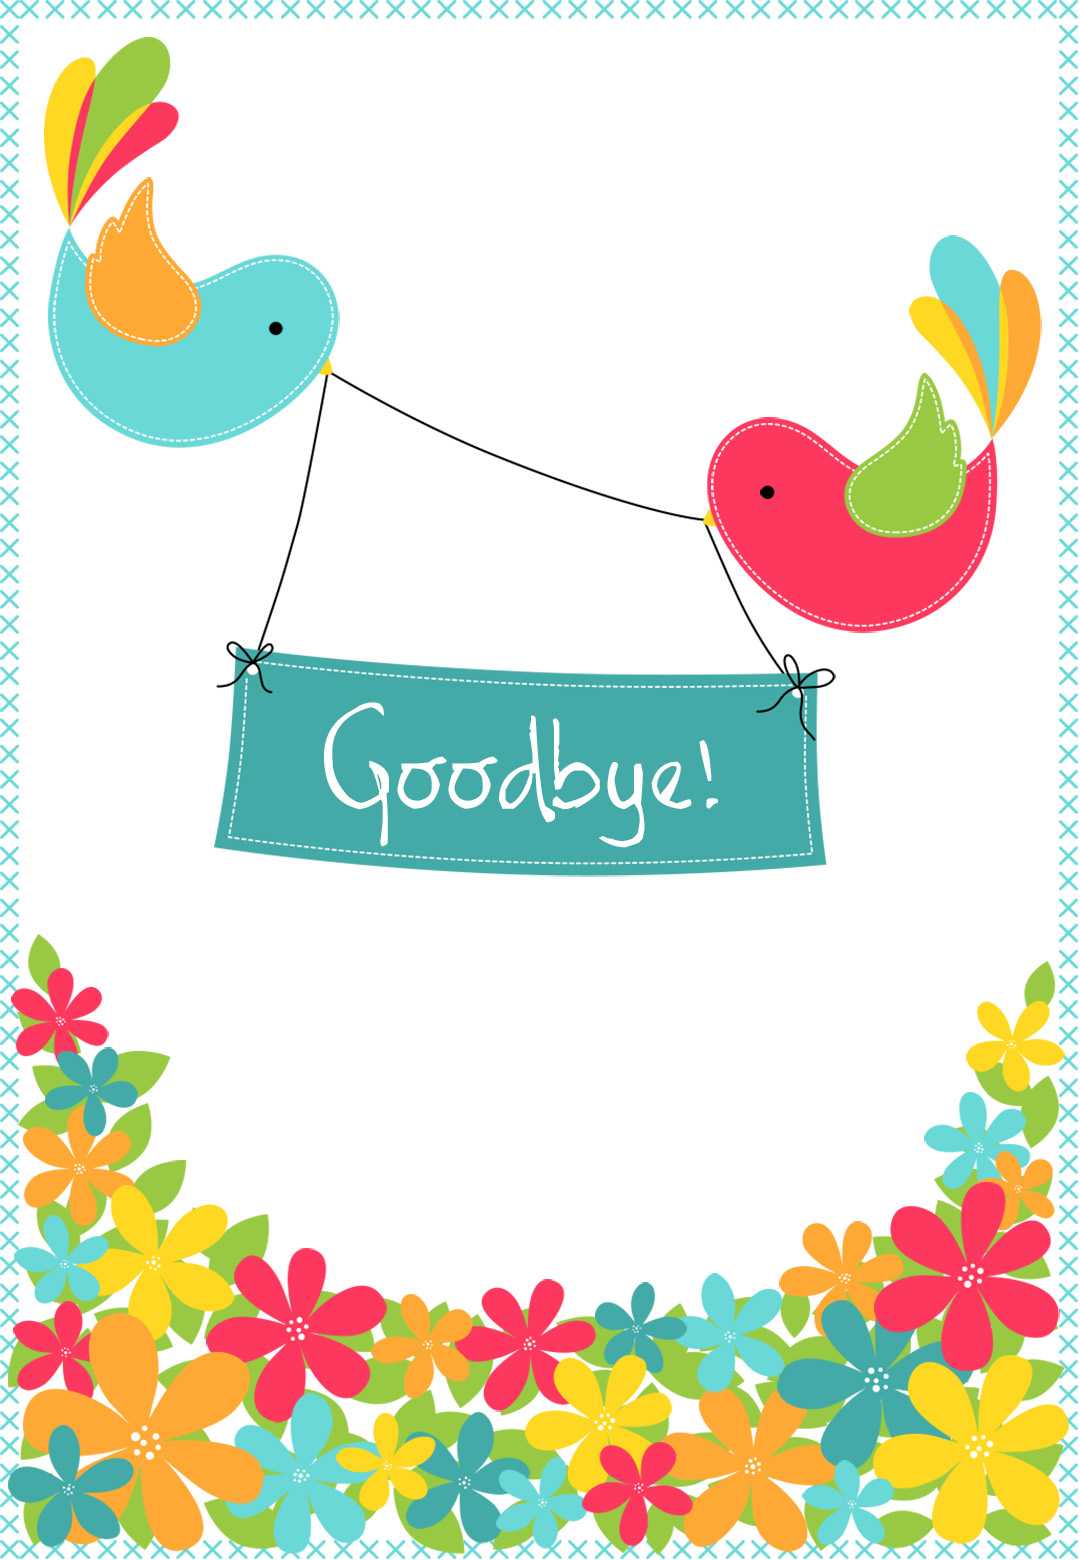 Goodbye From Your Colleagues – Good Luck Card (Free Throughout Good Luck Card Template